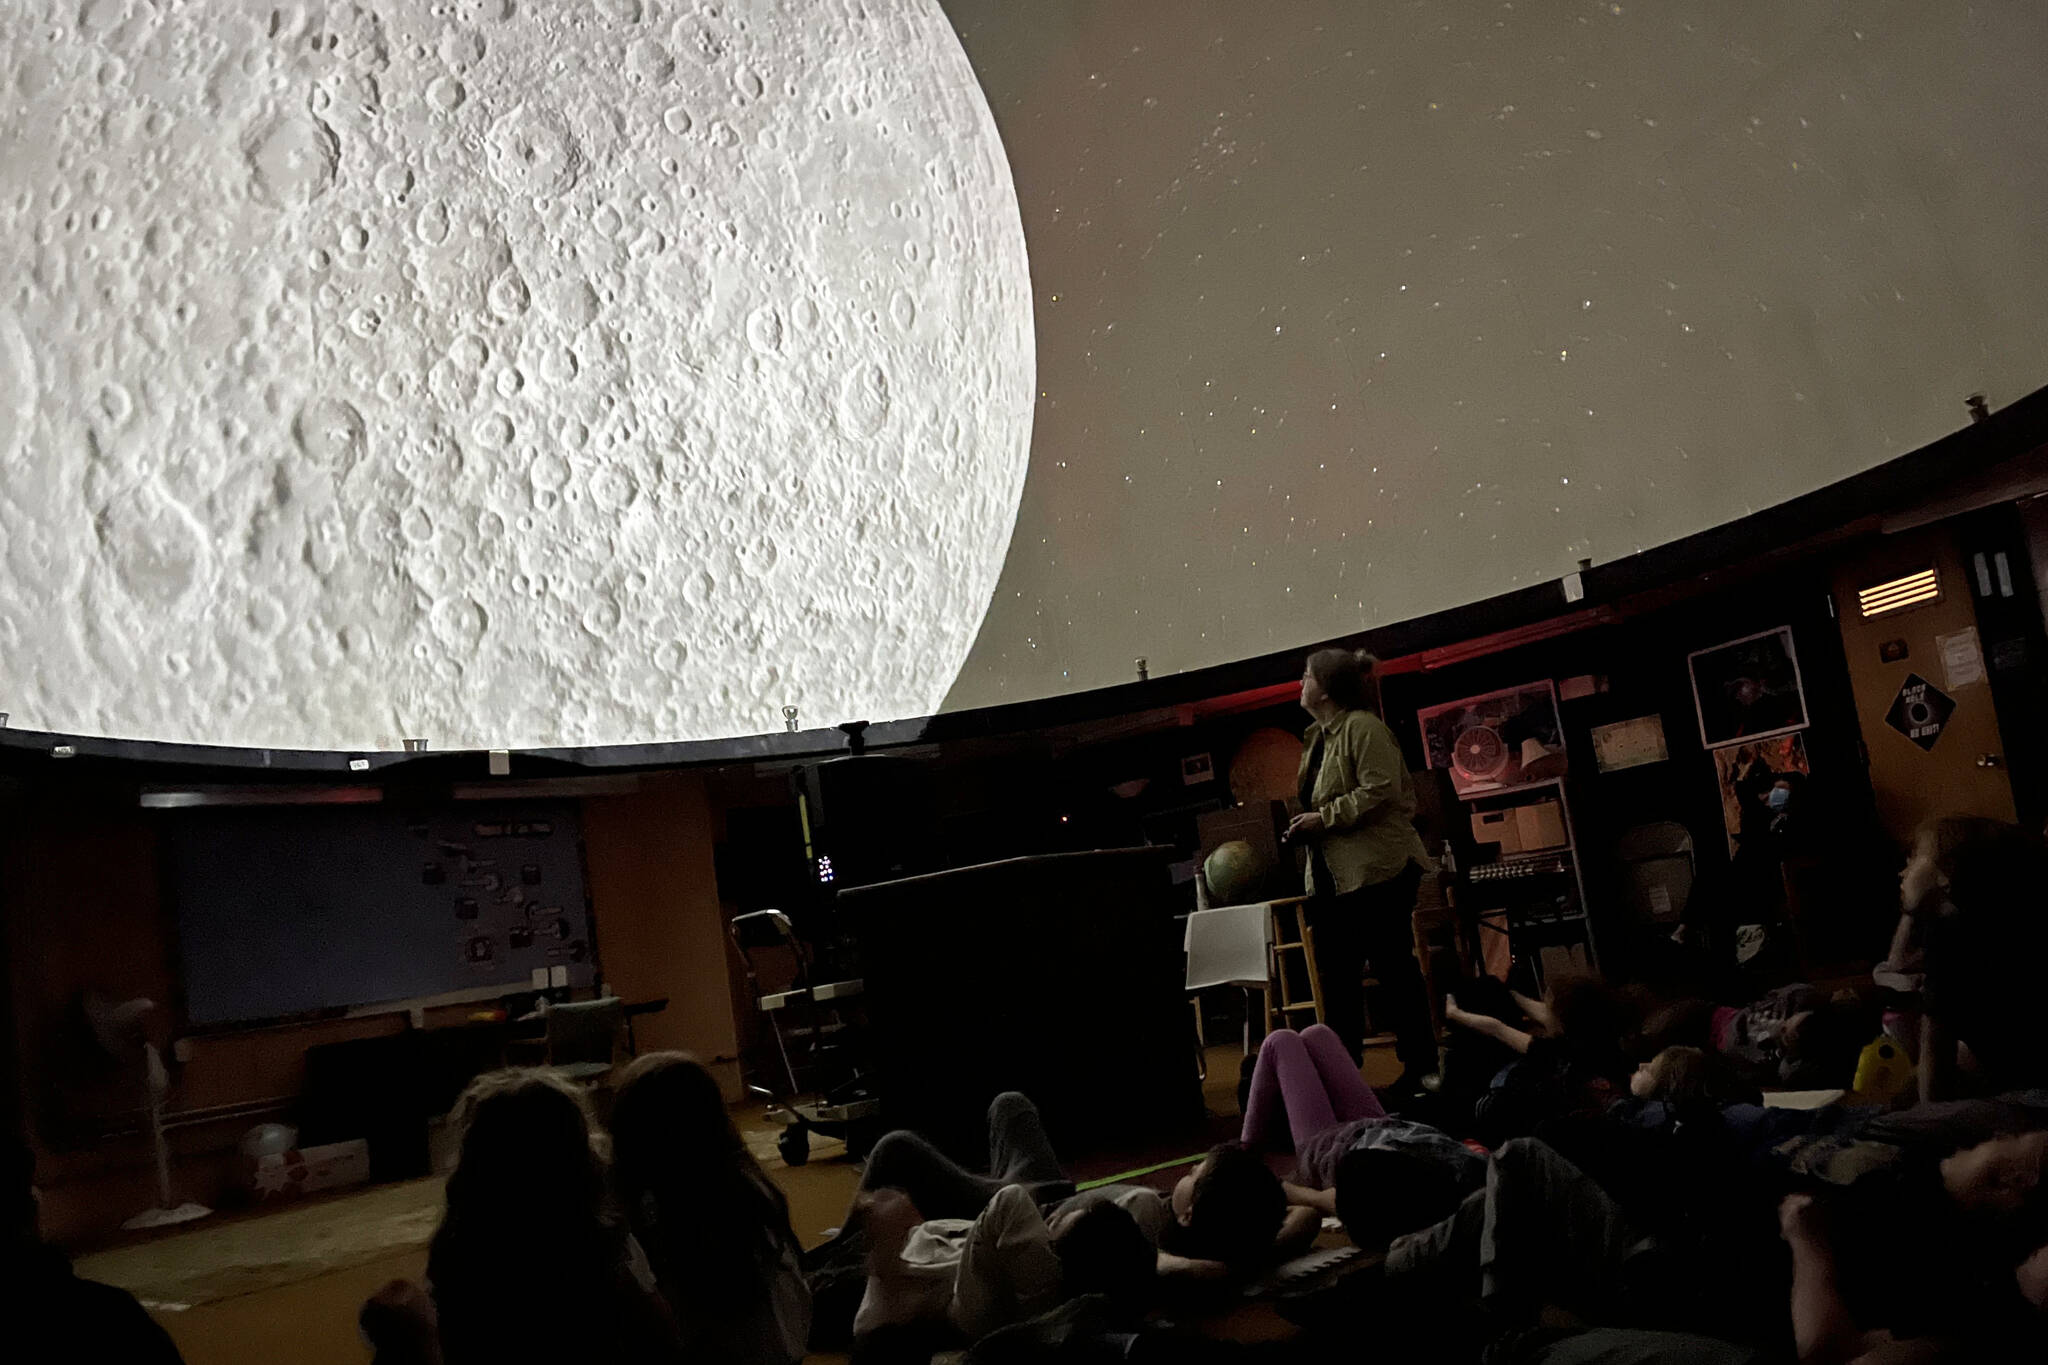 Rosemary Walling shows Montessori Borealis students close up views of the moon in between recorded segments of the story of Raven and the Box of Daylight on Friday as part of the Marie Drake Planetarium’s student field trips made possible by a grant from Douglas Dornan Foundation. (Jonson Kuhn / Juneau Empire)